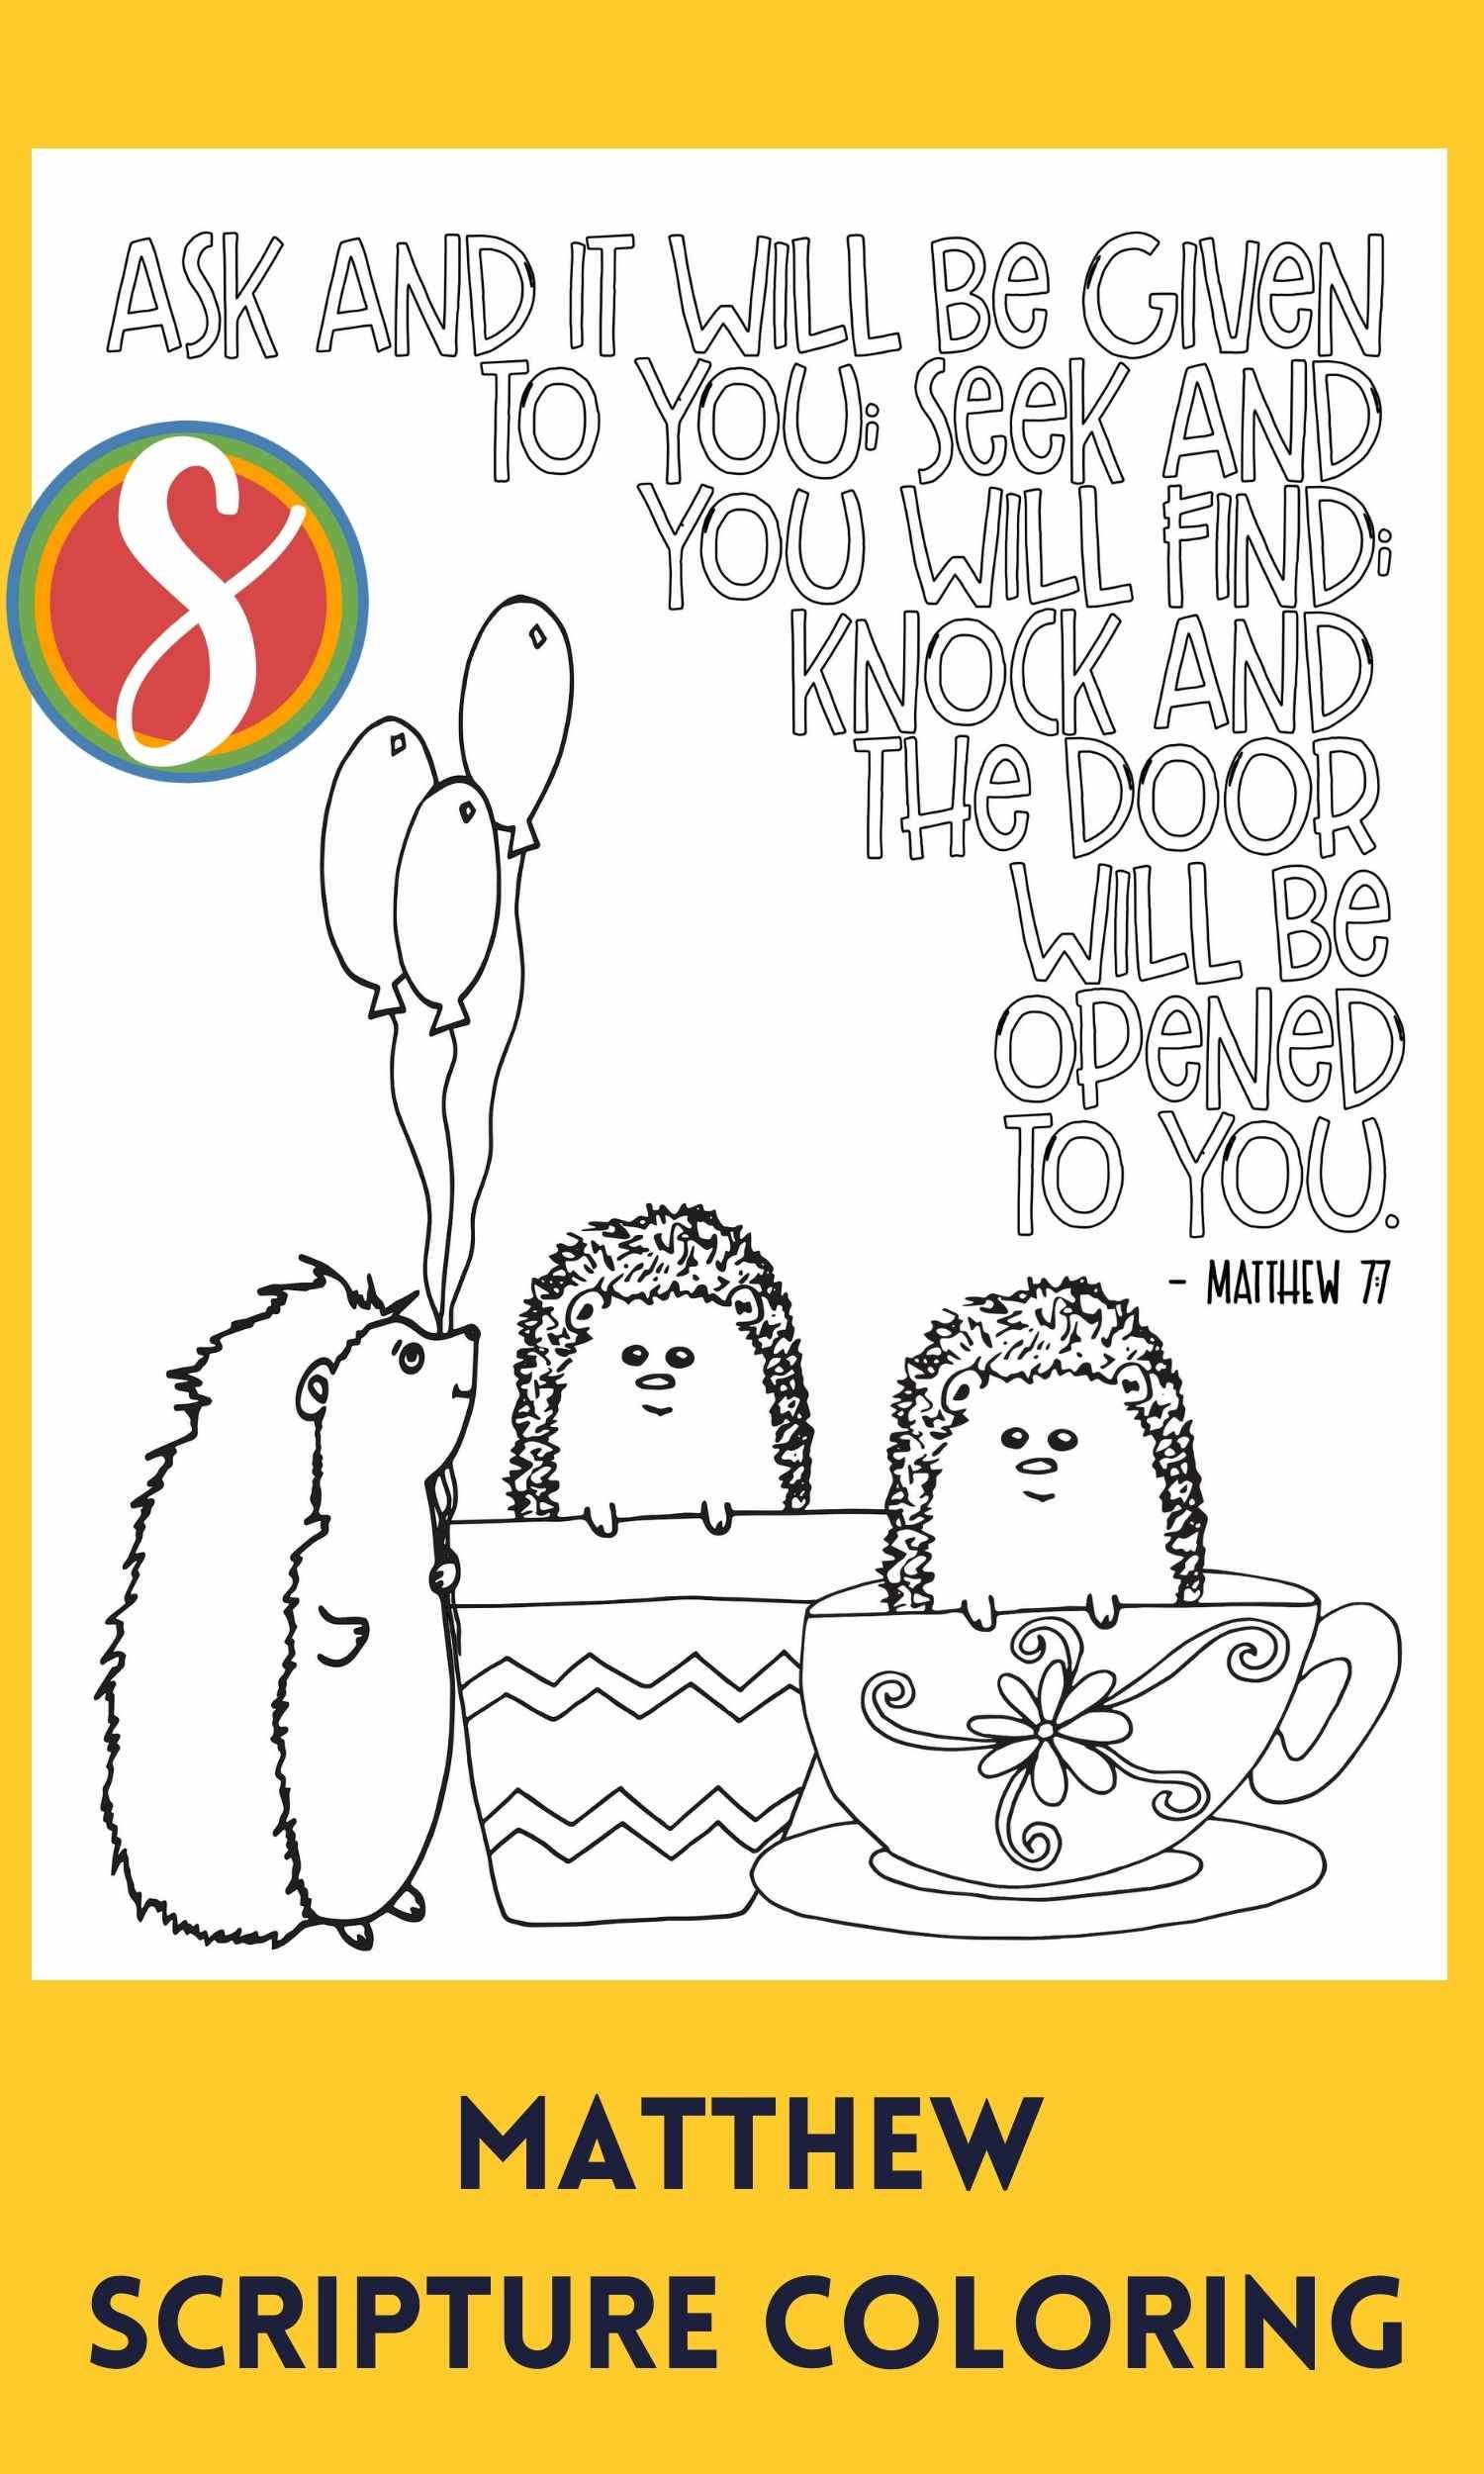 a hedgehog holding balloons, a hedgehog in a planter, a hedgehog in a teapot, to color, colorable text "Ask and it will be given to you; seek and you will find; knock and the door will be opened to you."